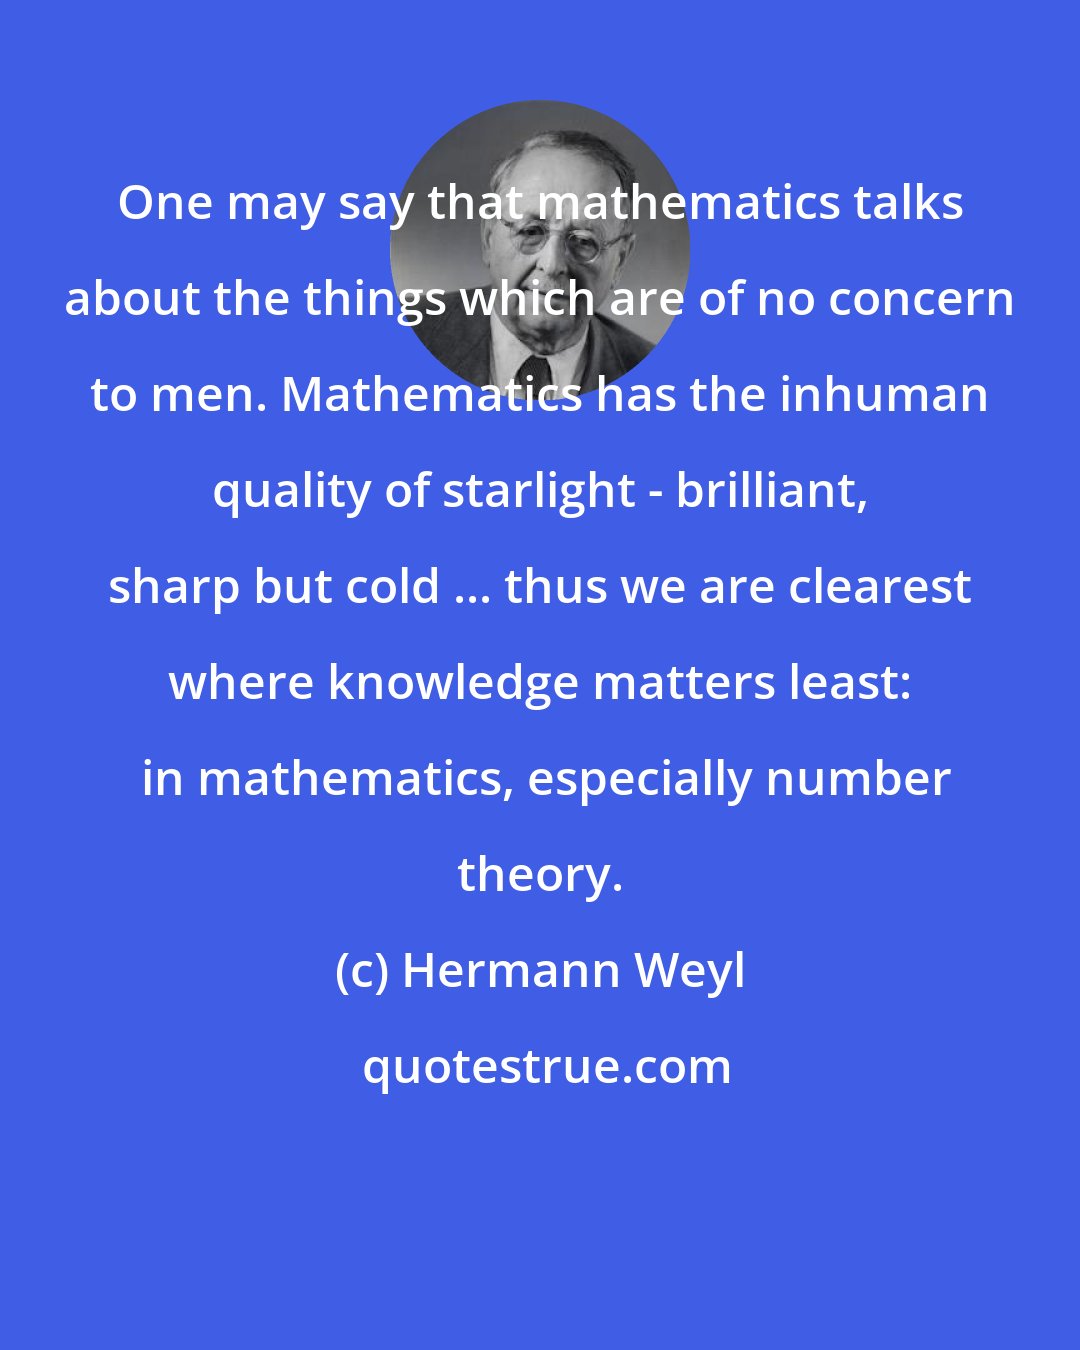 Hermann Weyl: One may say that mathematics talks about the things which are of no concern to men. Mathematics has the inhuman quality of starlight - brilliant, sharp but cold ... thus we are clearest where knowledge matters least:  in mathematics, especially number theory.